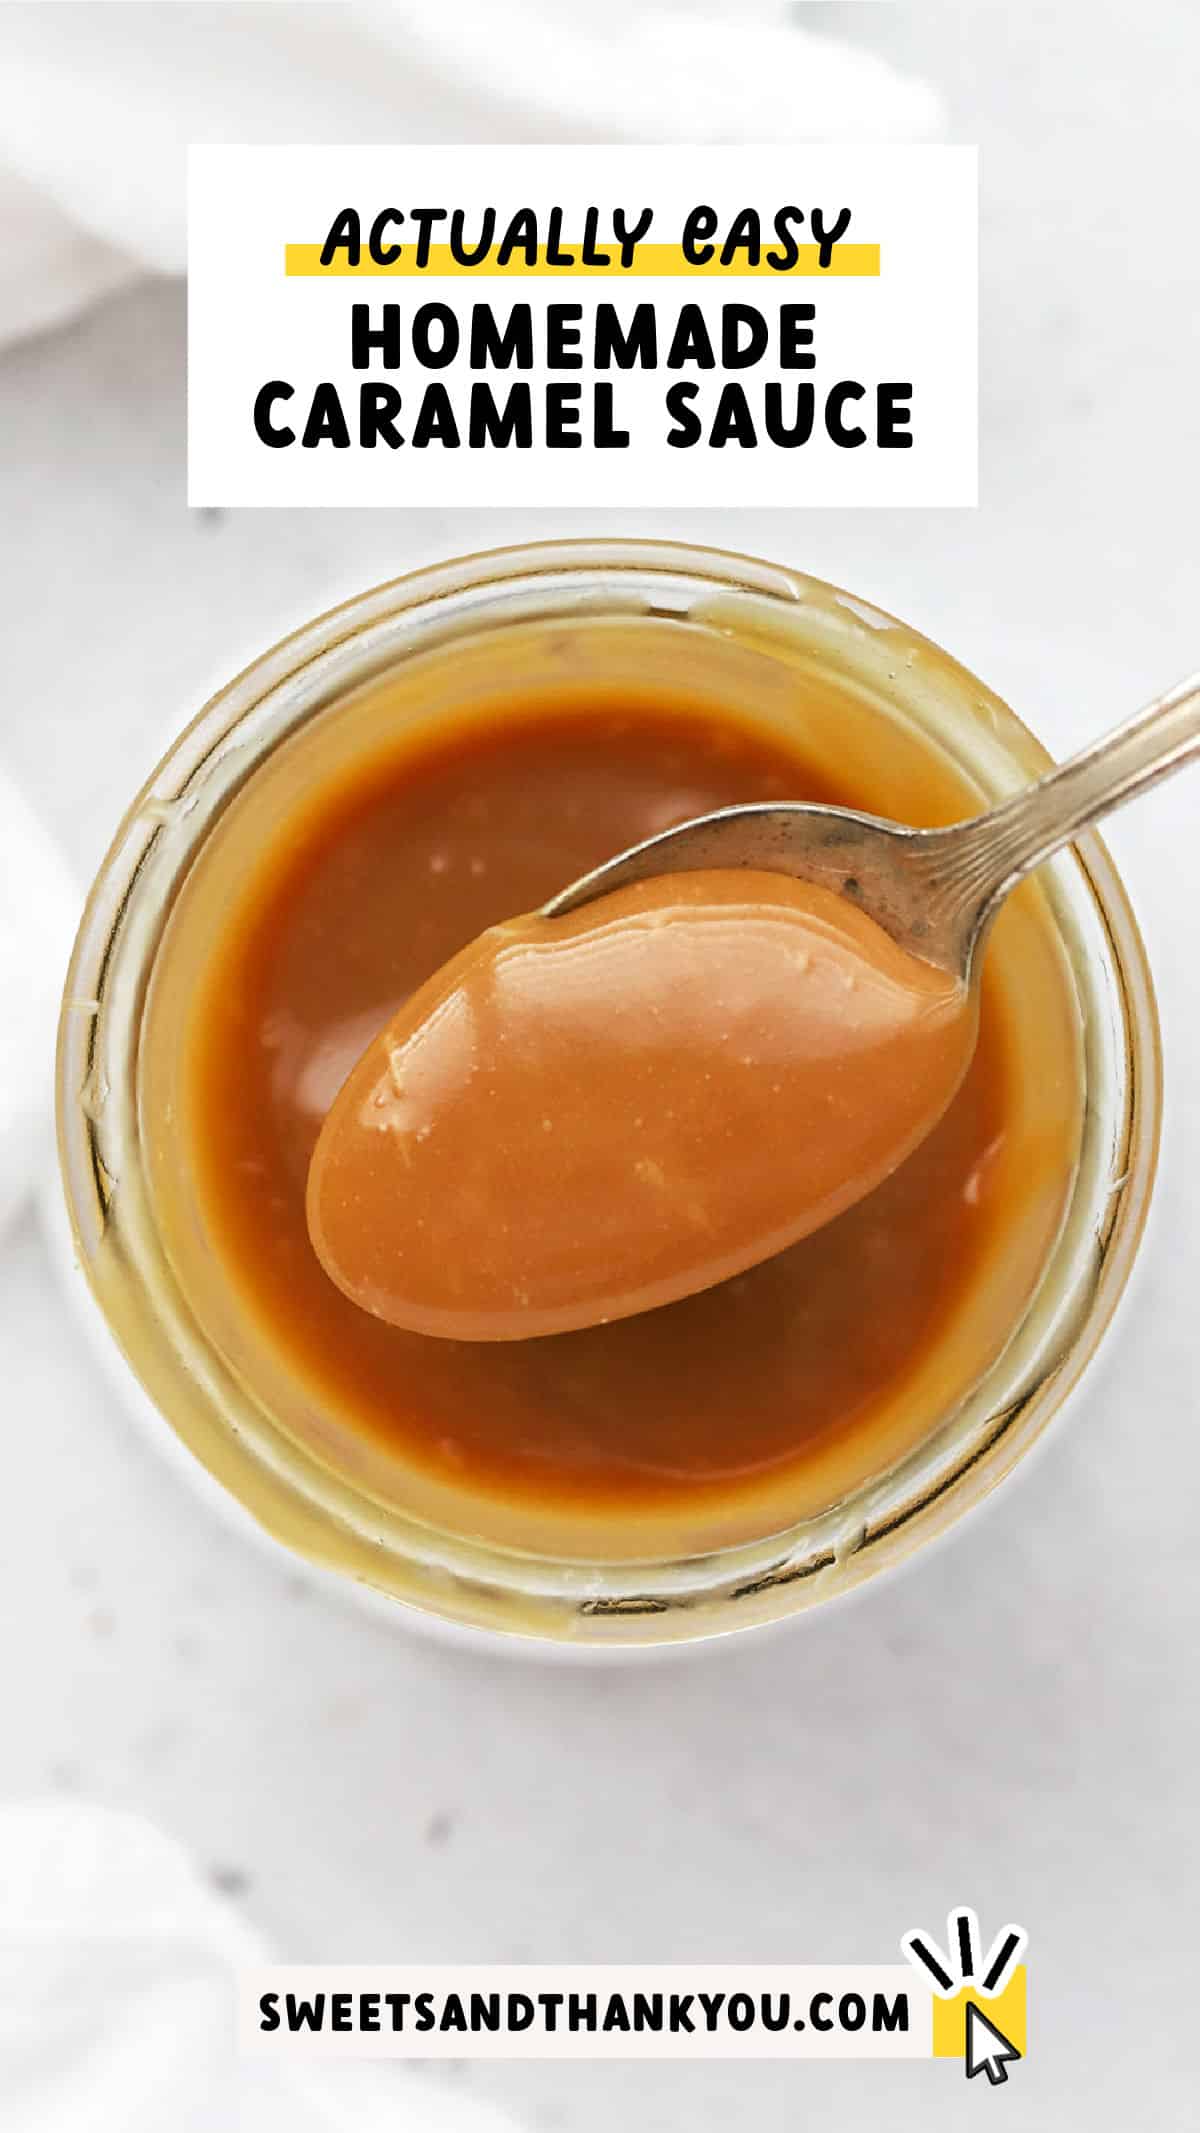 Learn How To Make Caramel Sauce! Our easy homemade caramel sauce recipe is great for beginners and baking pros alike. You'll love it on ice cream, cake, brownies and more! With our step by step tutorial, we'll walk you through everything you need to know to make the best homemade caramel sauce. Get the recipe and 12+ way to use caramel sauce at Sweets & Thank You